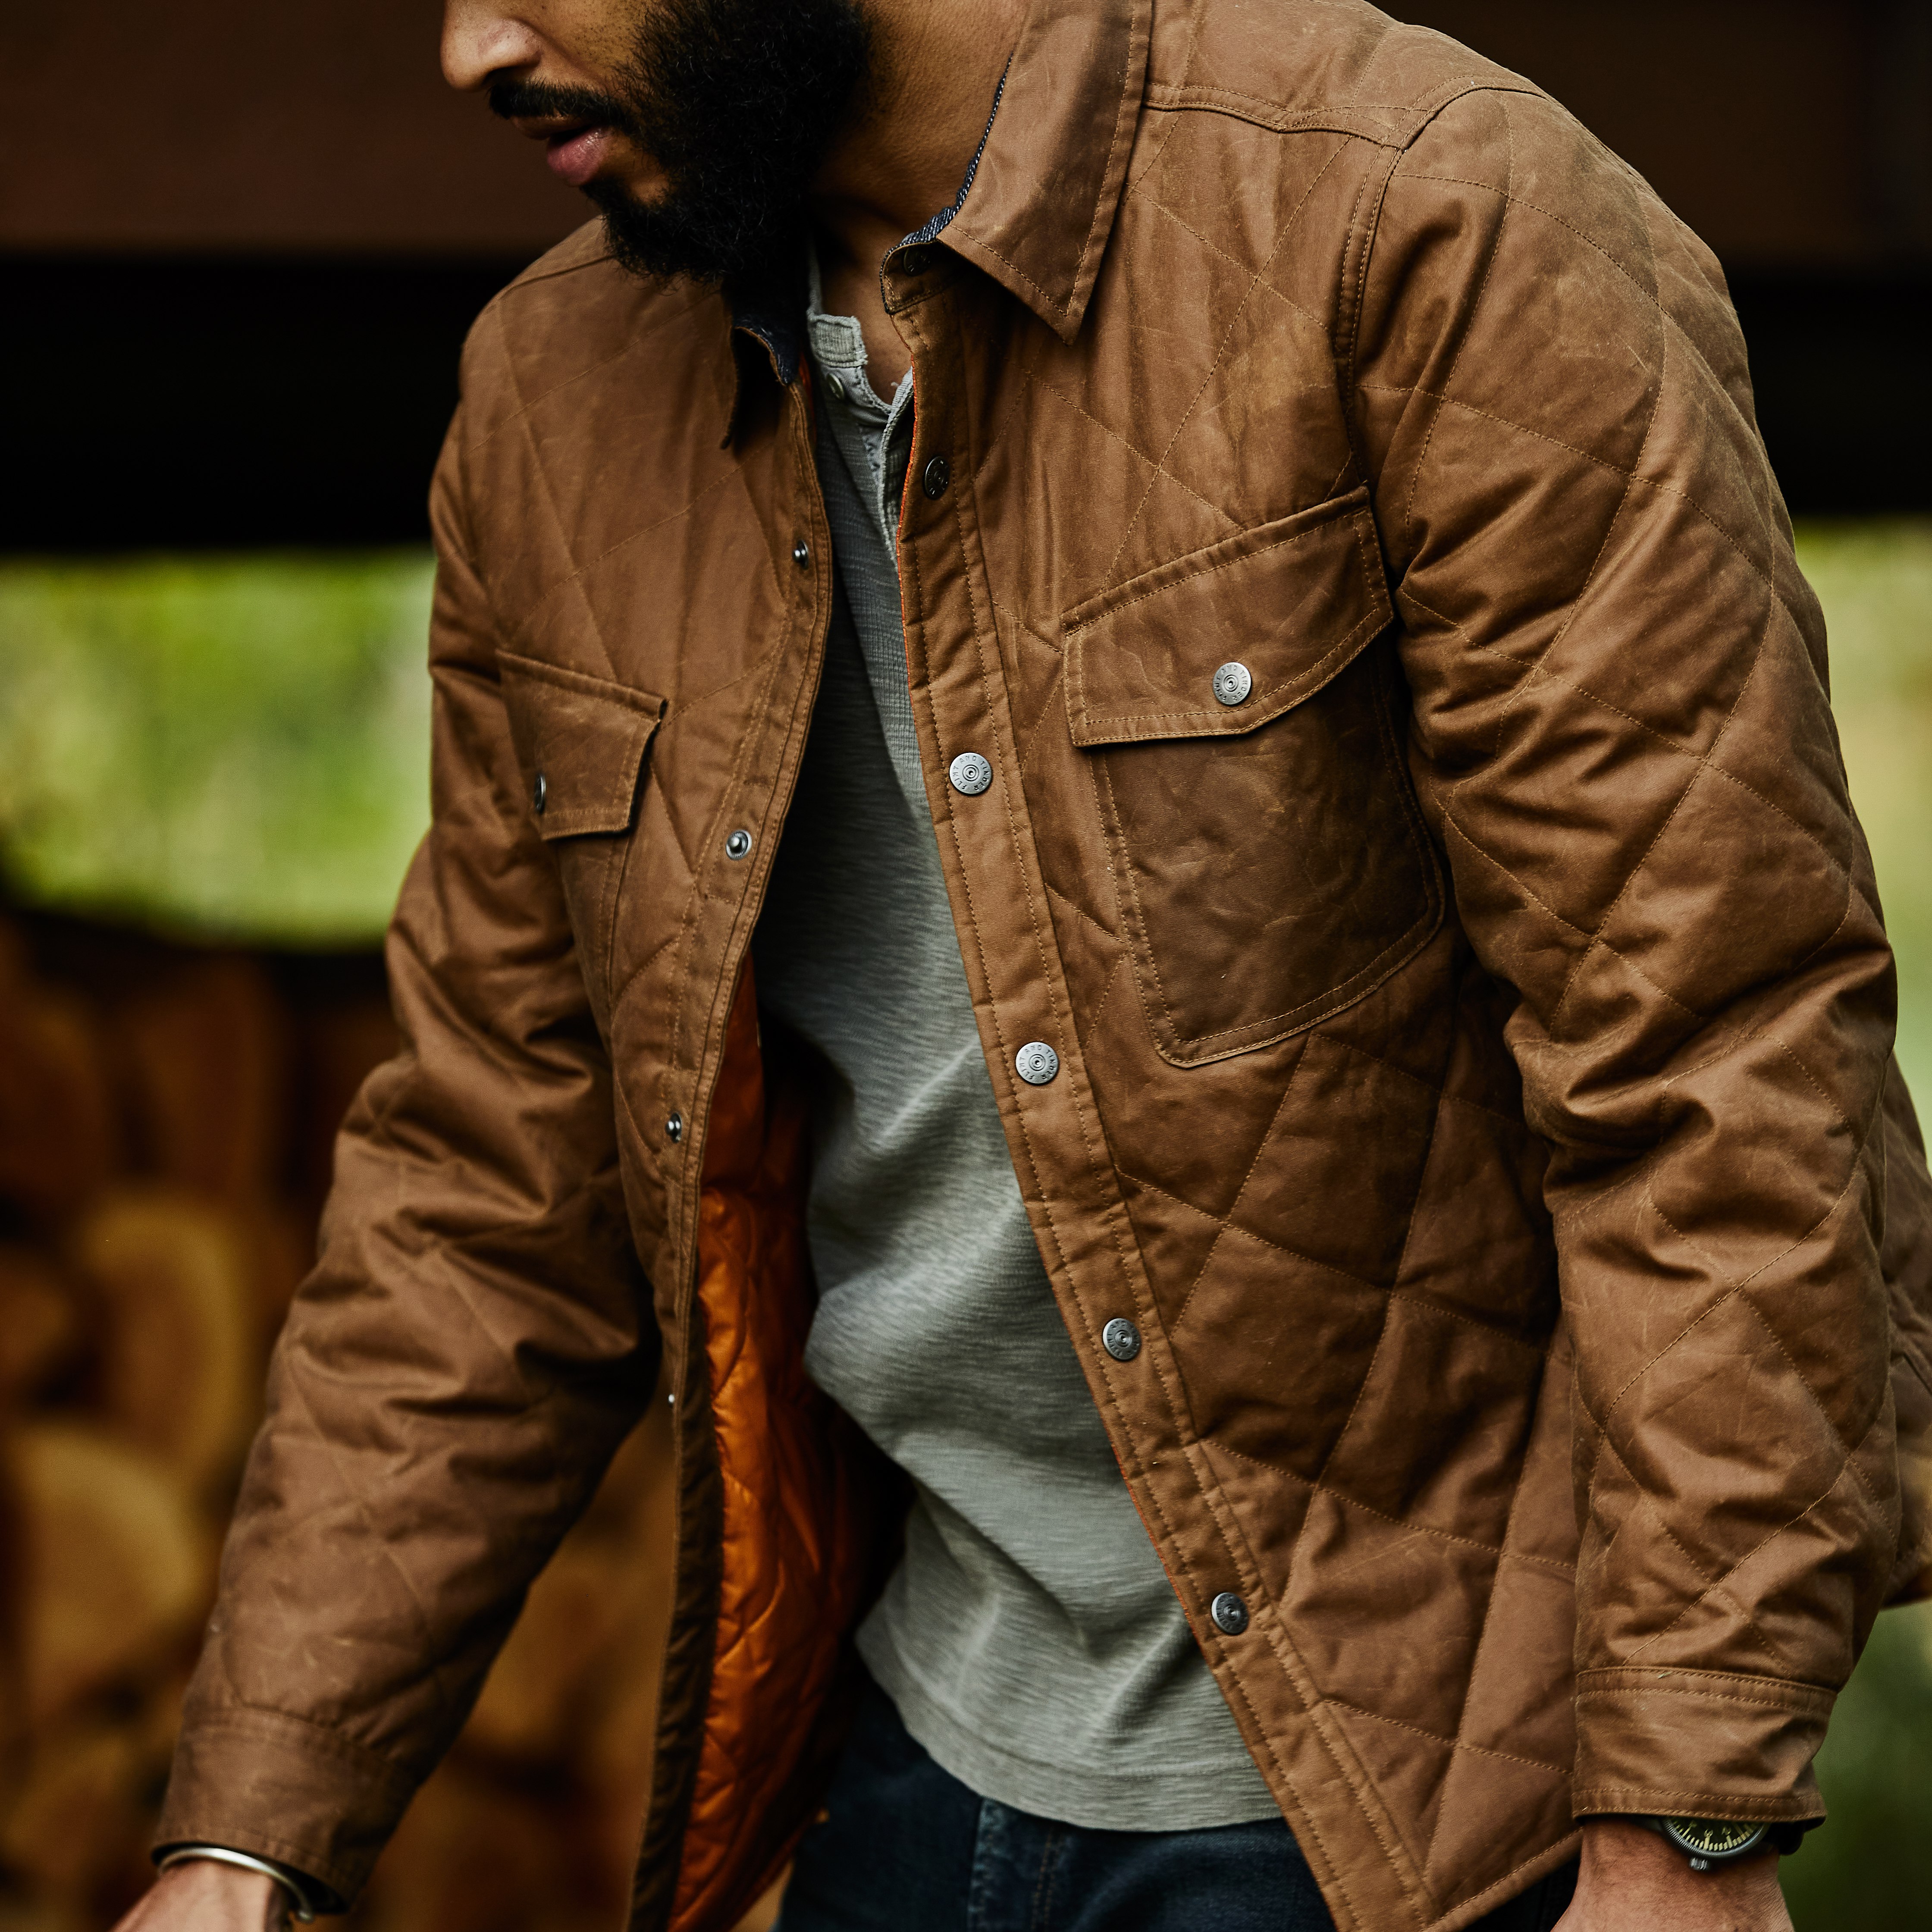 Flint and Tinder Quilted Waxed Shirt Jacket - Brown w/ Orange